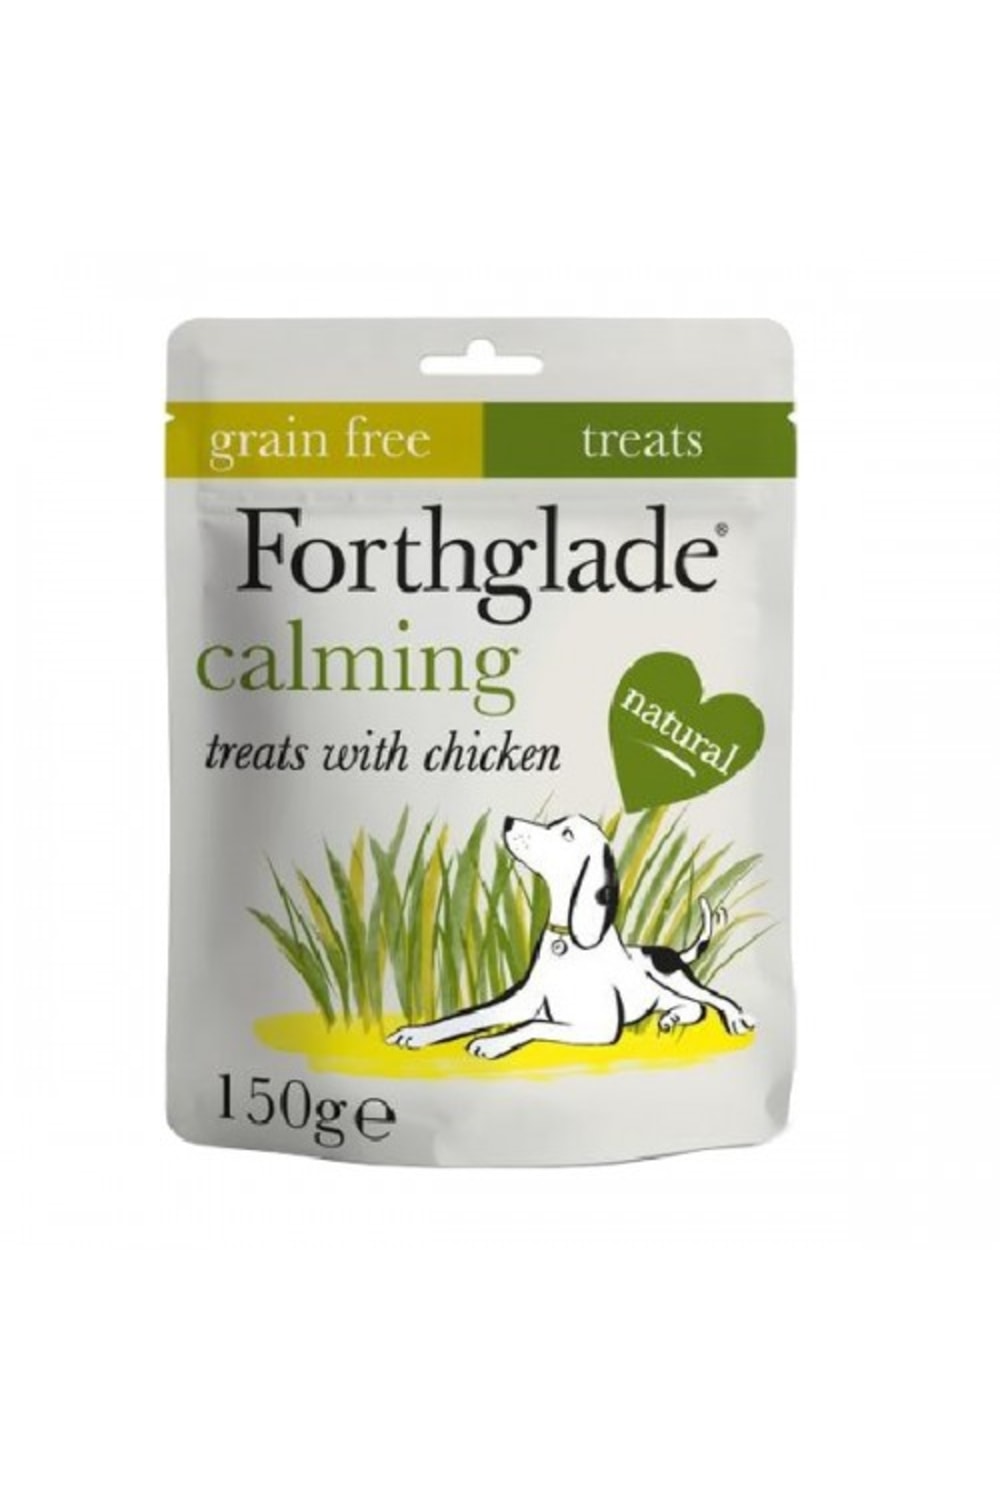 Forthgalde Hand Baked Calming Dog Treat Chicken (May Vary) (One Size)